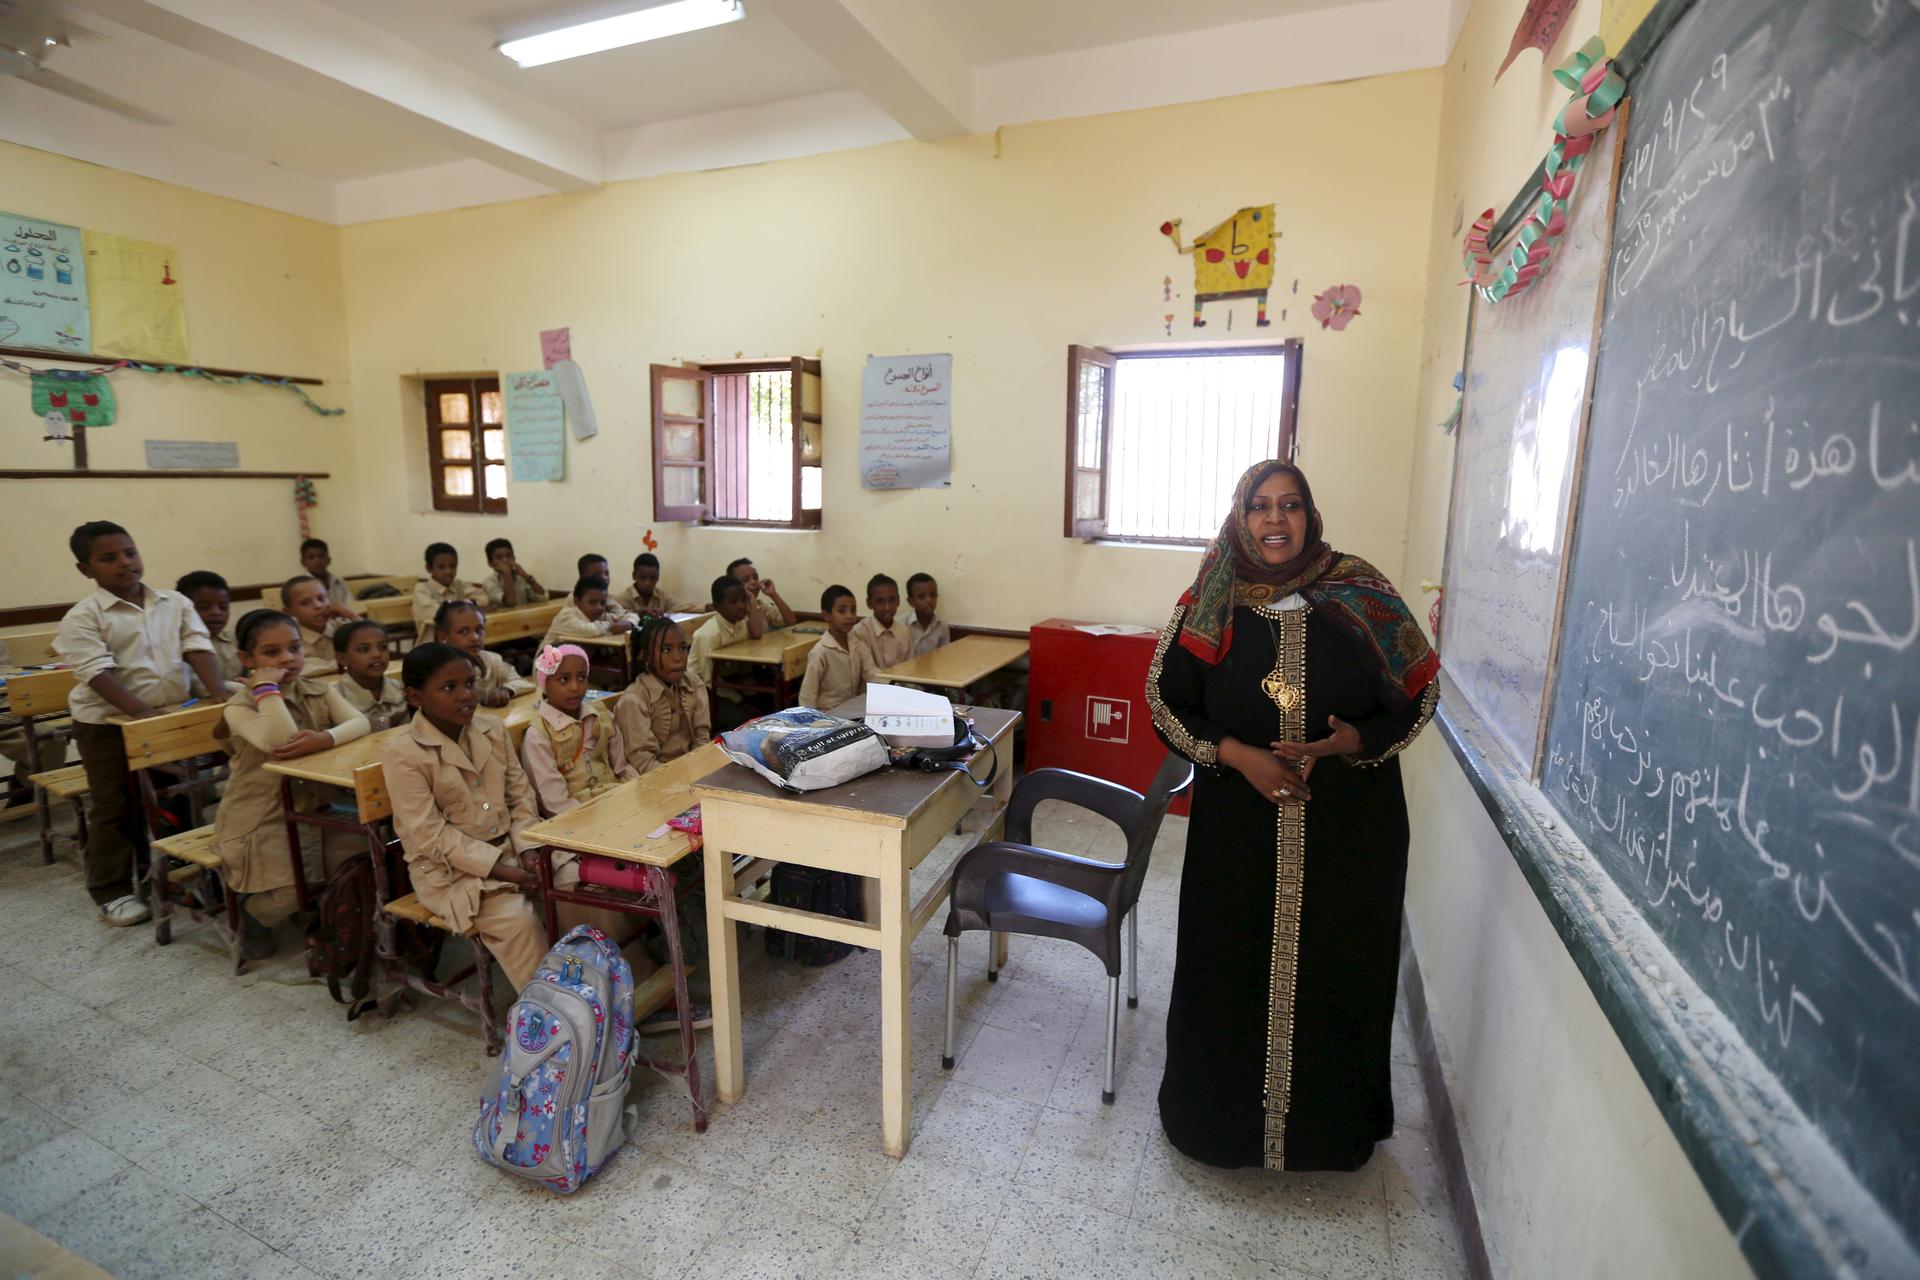 A teacher conducts a lesson at a school in the Nubian village of Adindan.